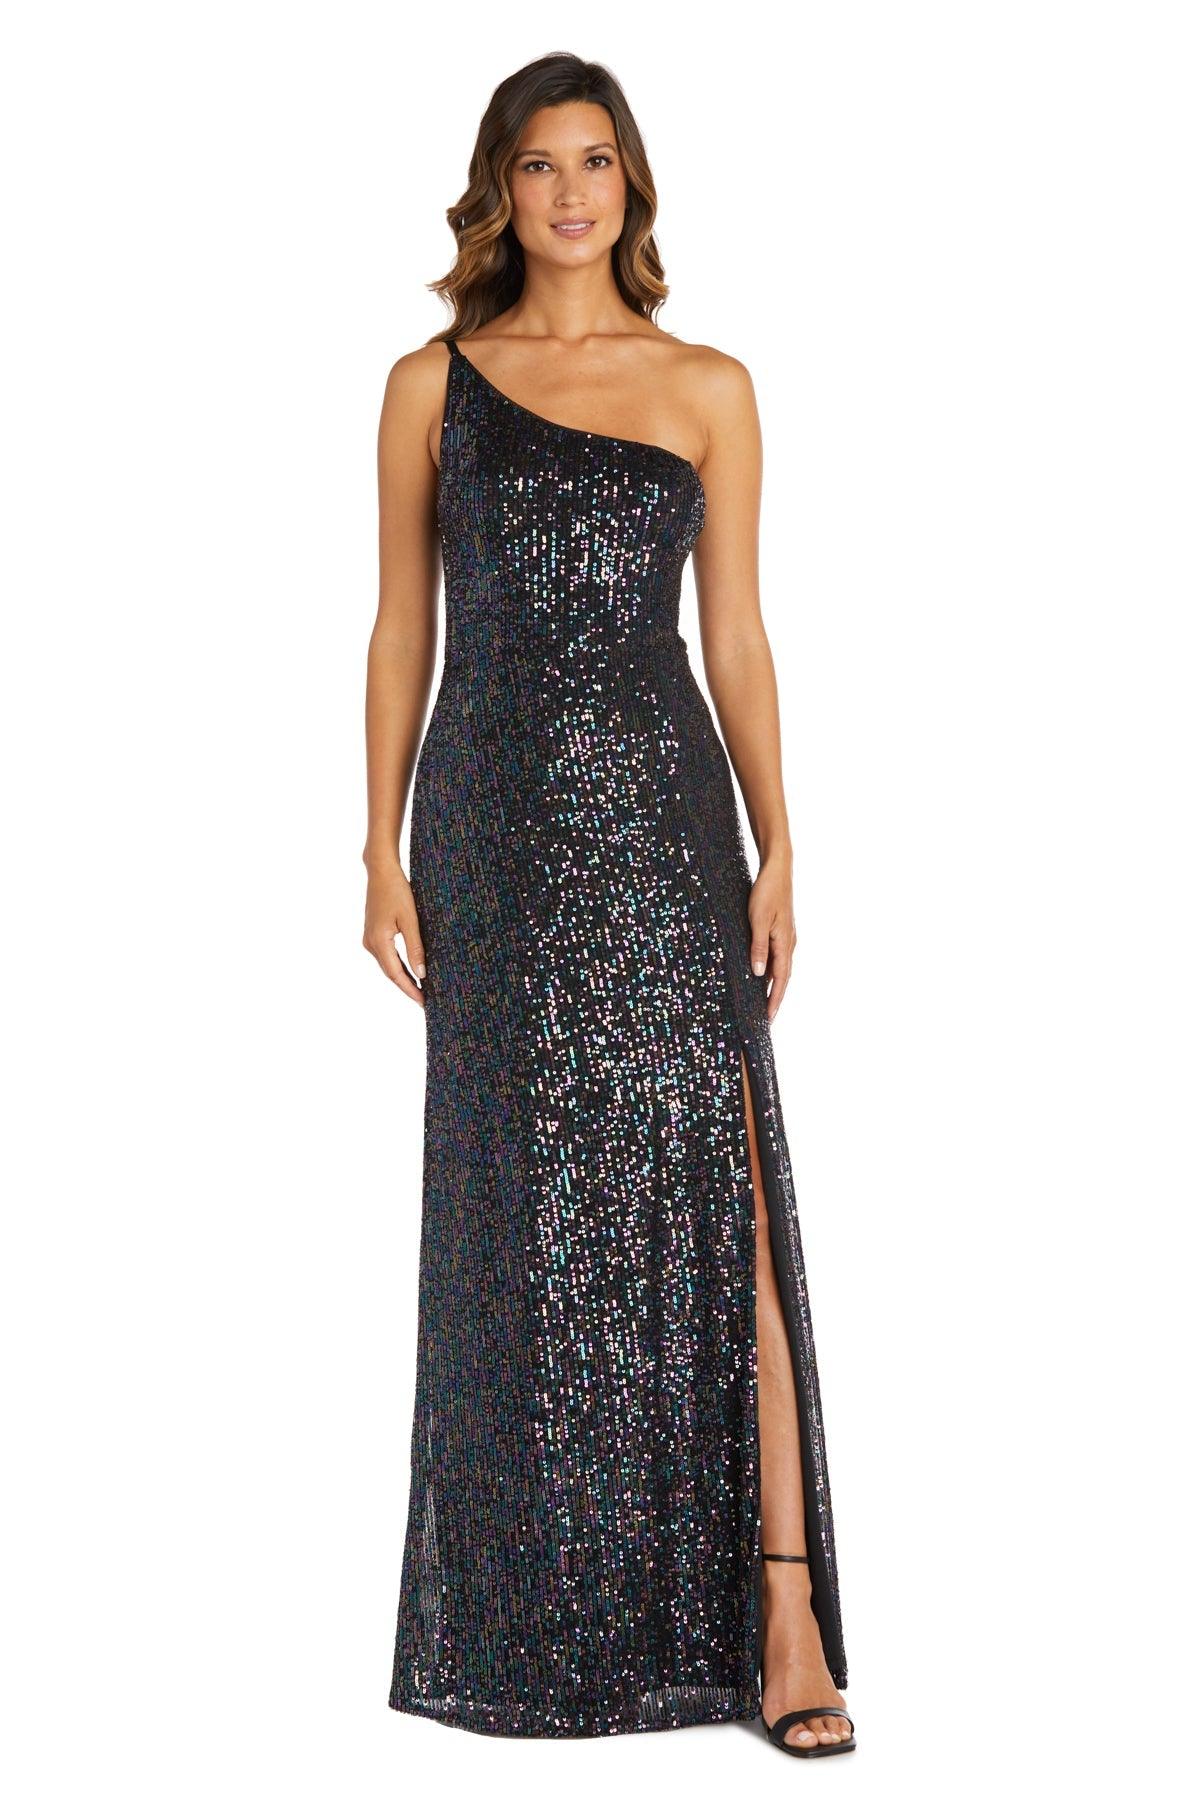 Nightway Long One Shoulder Petite Formal Gown 22121P - The Dress Outlet